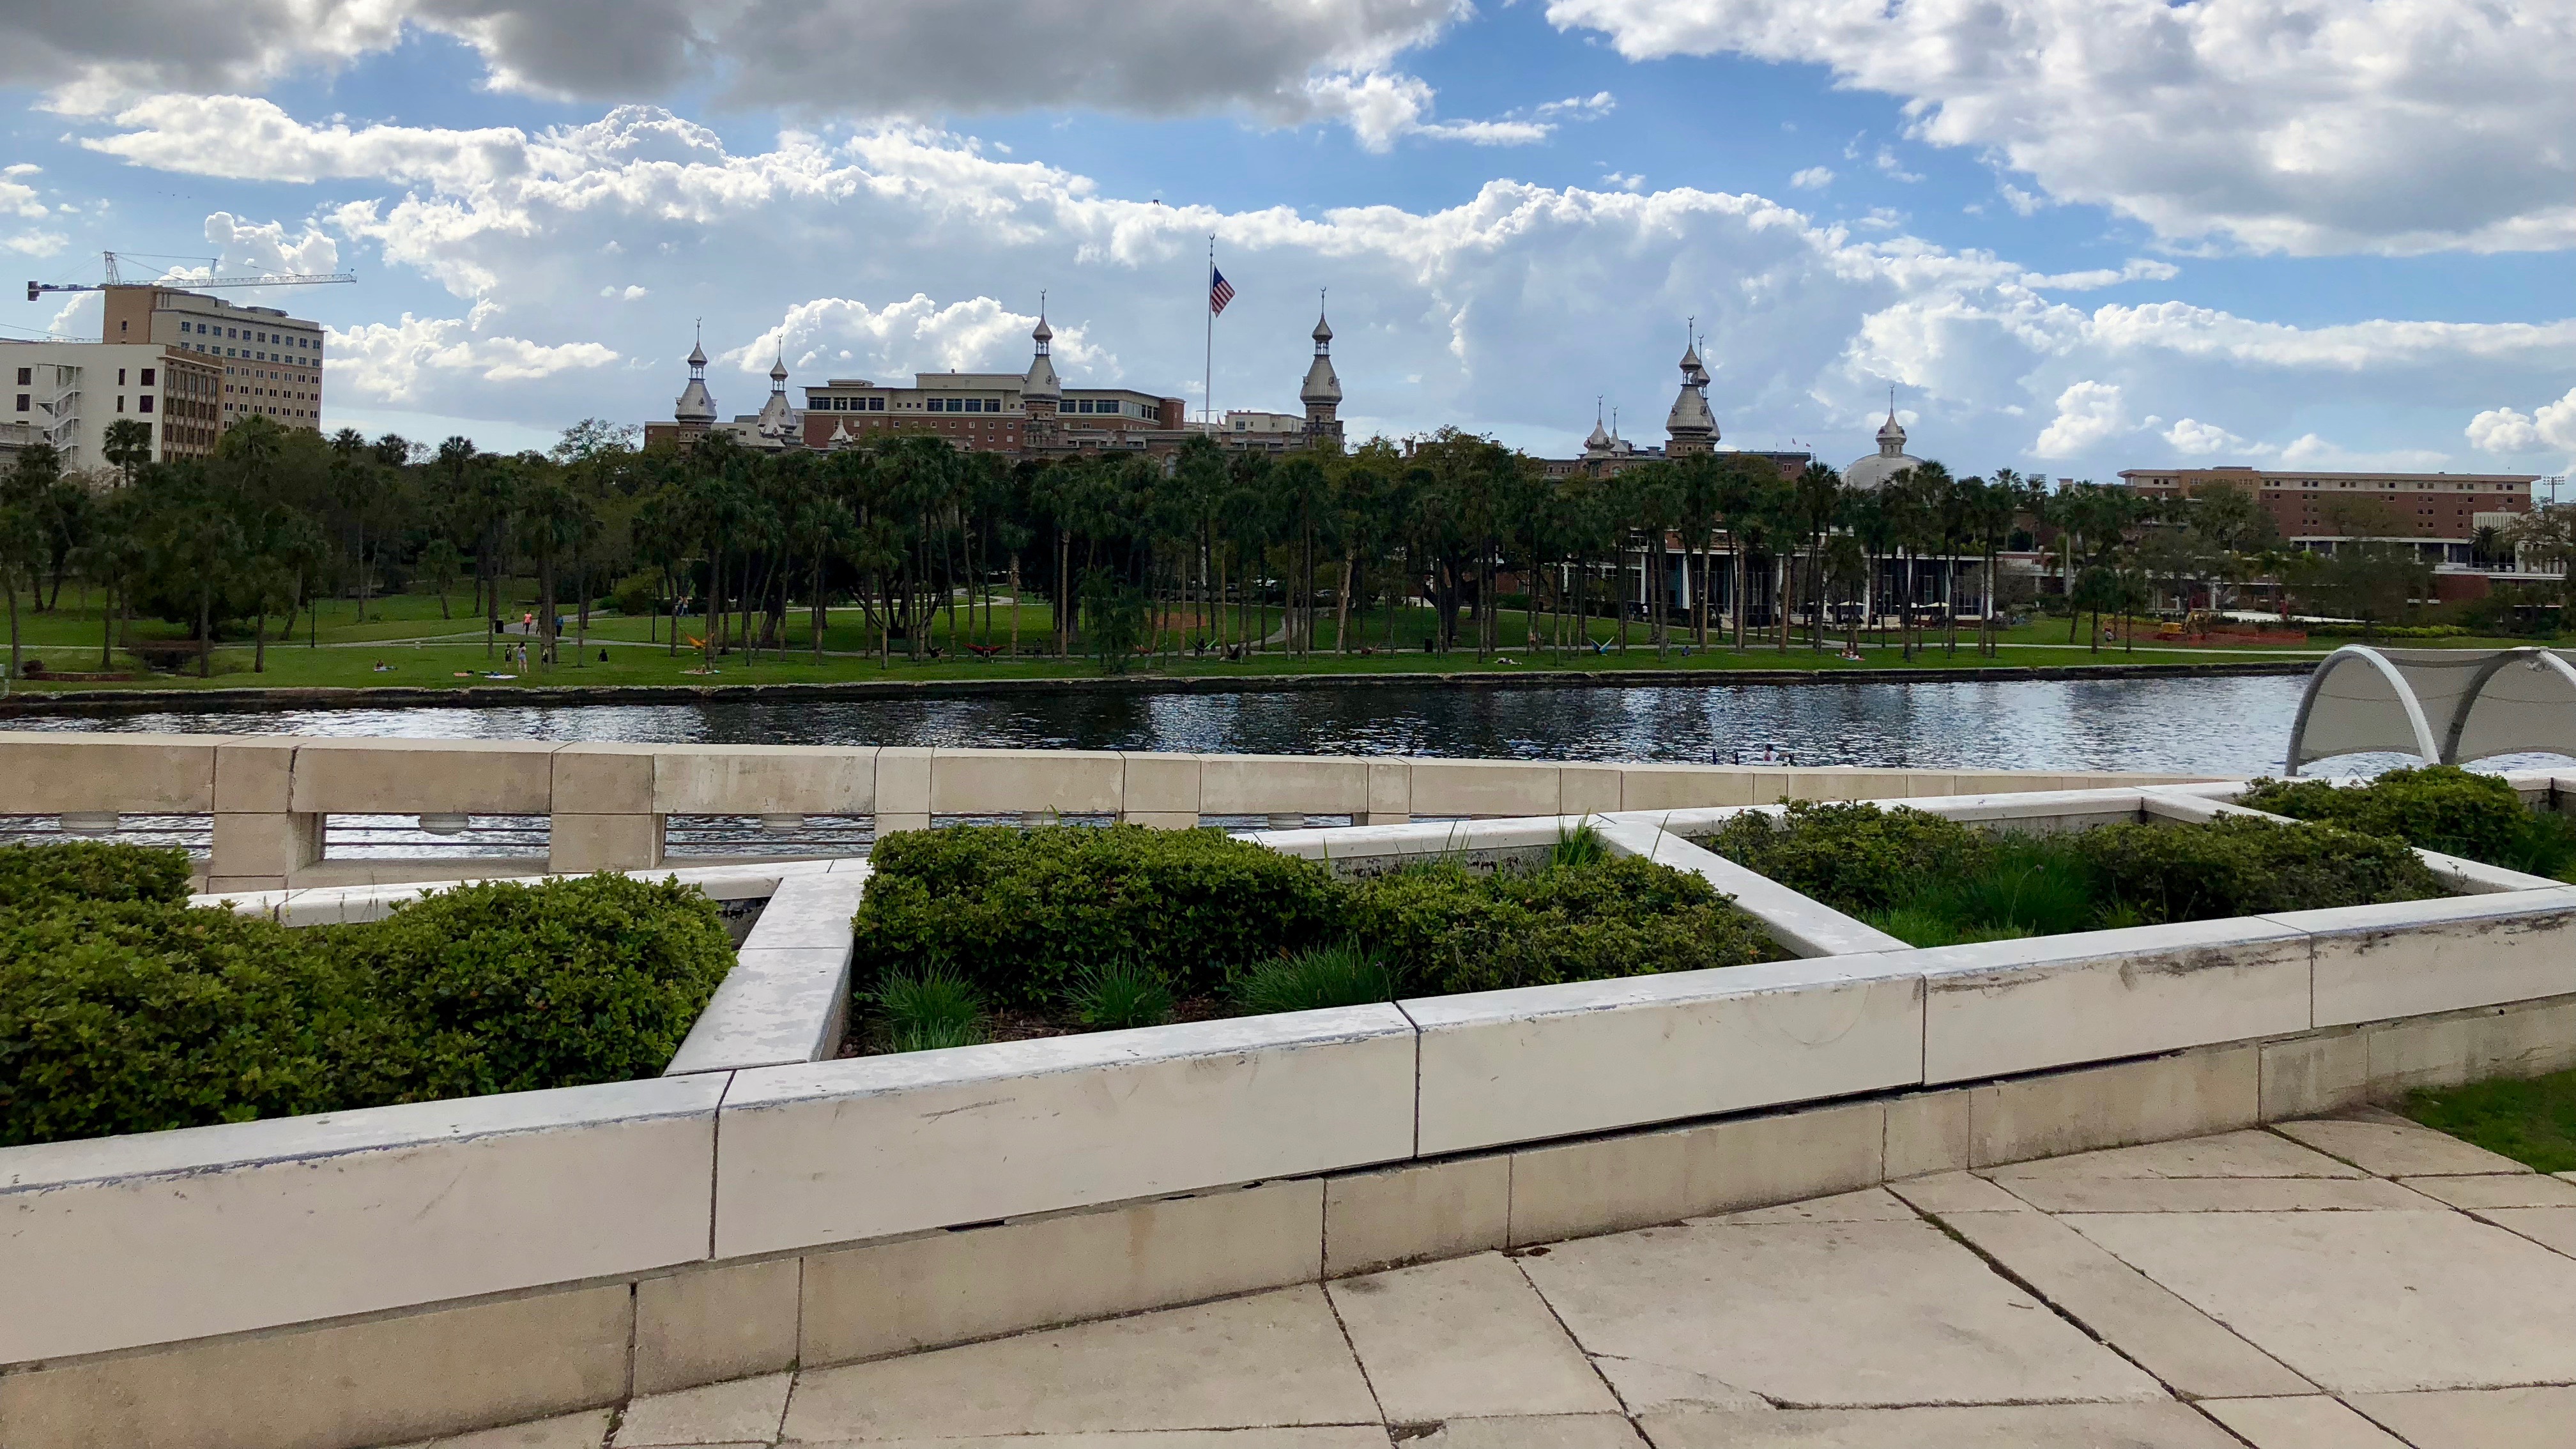 Minarets of the University of Tampa, seen from Kiley Gardens.